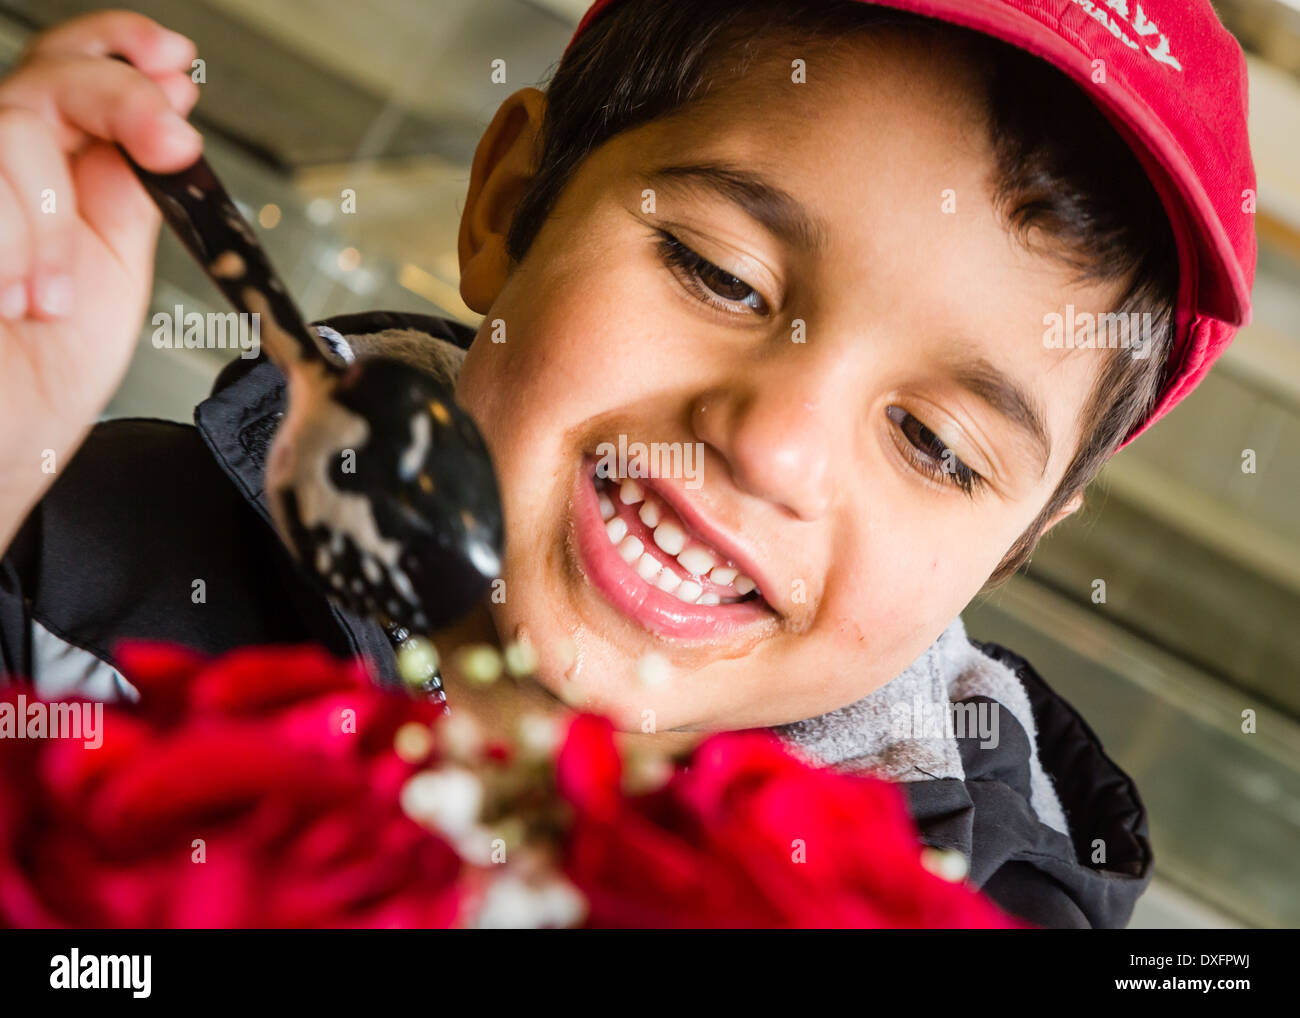 Closeup, of boy with red cap. Stock Photo